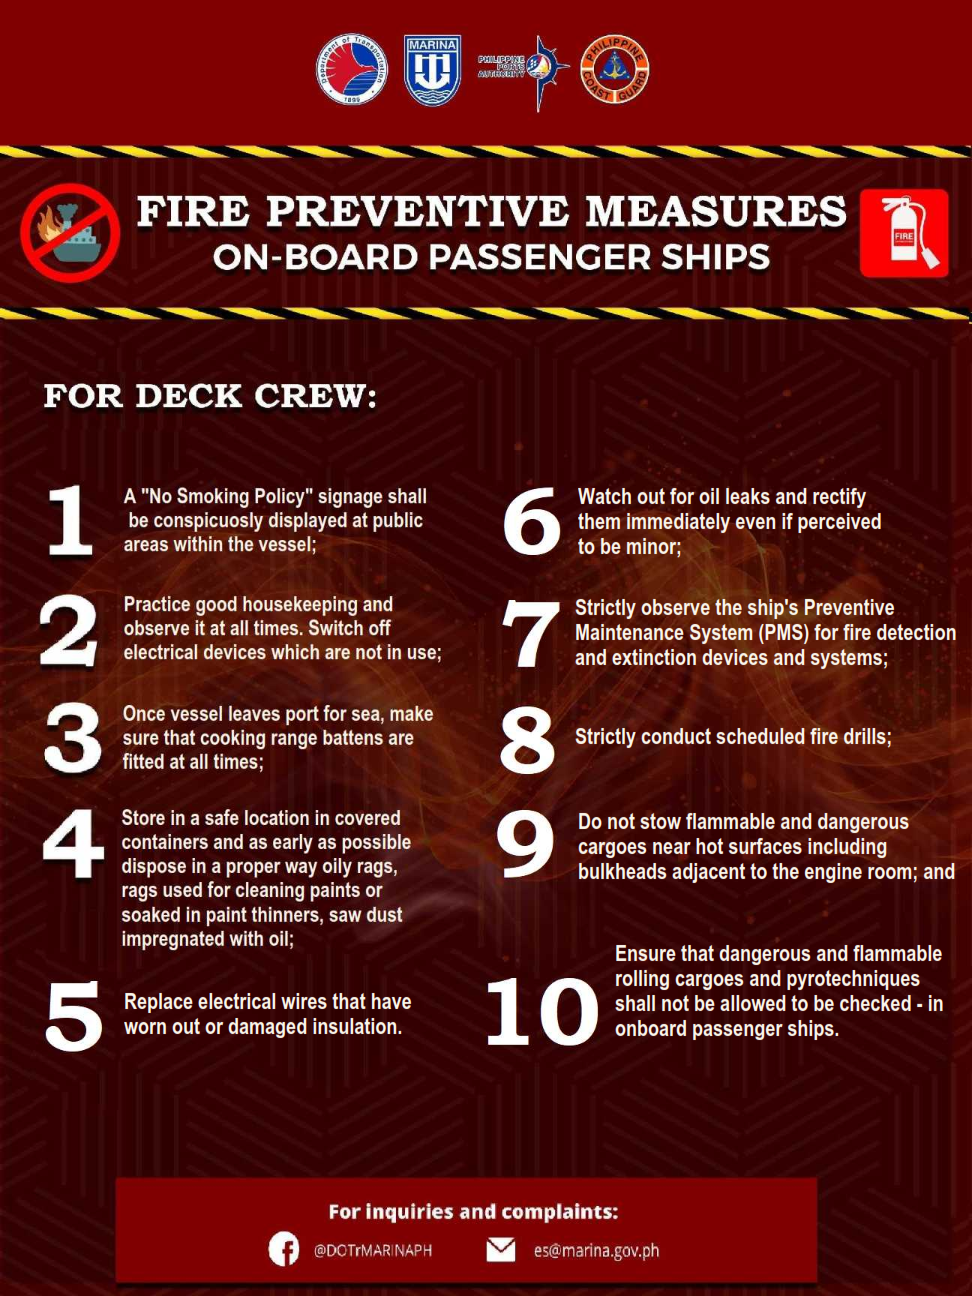 V3.Deck Crew_FOR PASSENGERS_Fire Preventive Measures poster_FINAL 10 March 2023_001_001 (2)